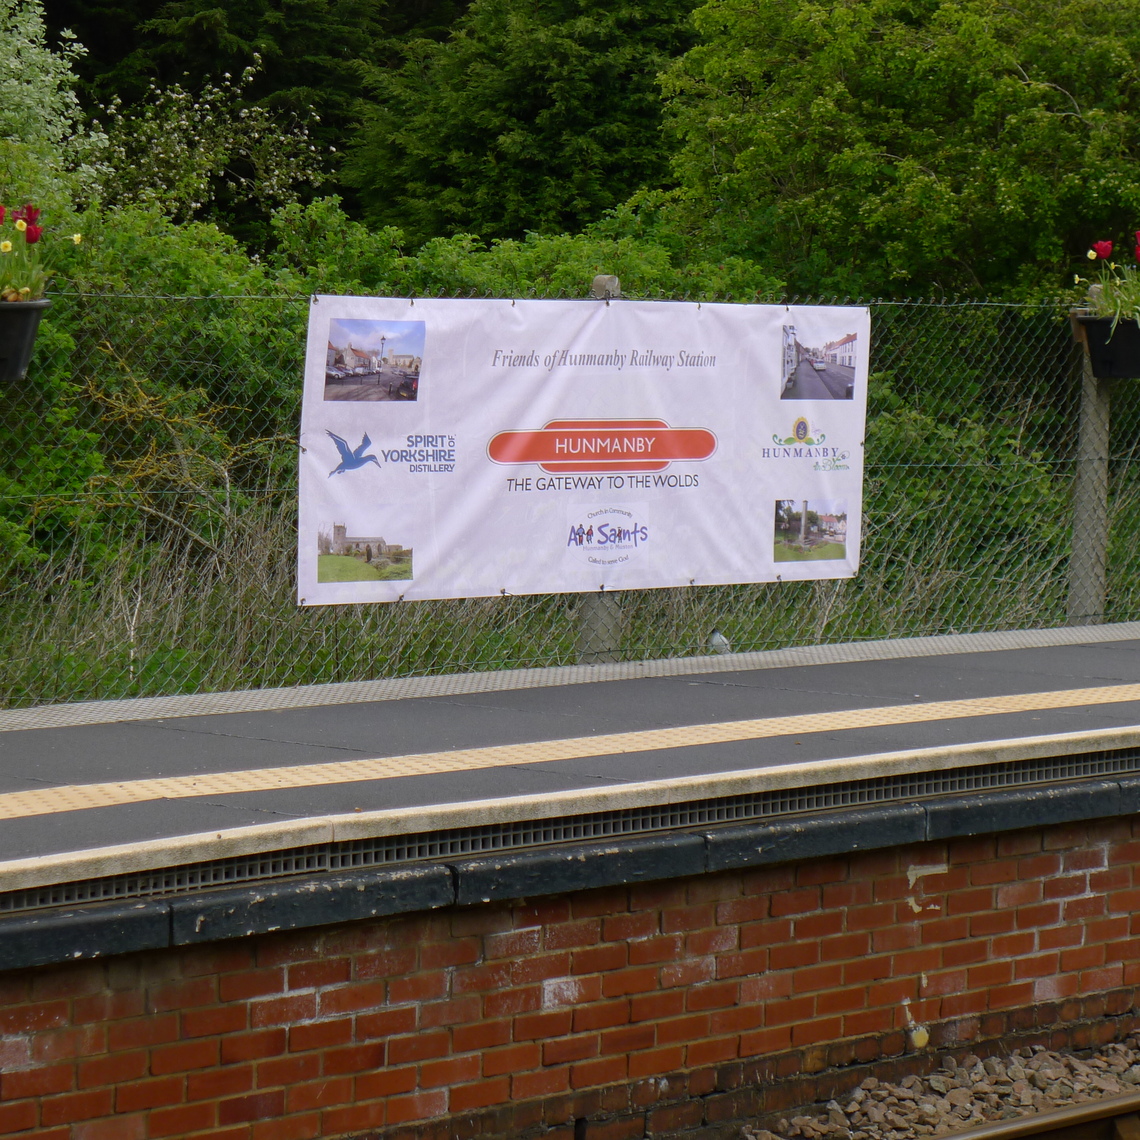 Banner promoting Hunmanby Village, kindly paid for by the Spirit of Yorkshire Distilleery